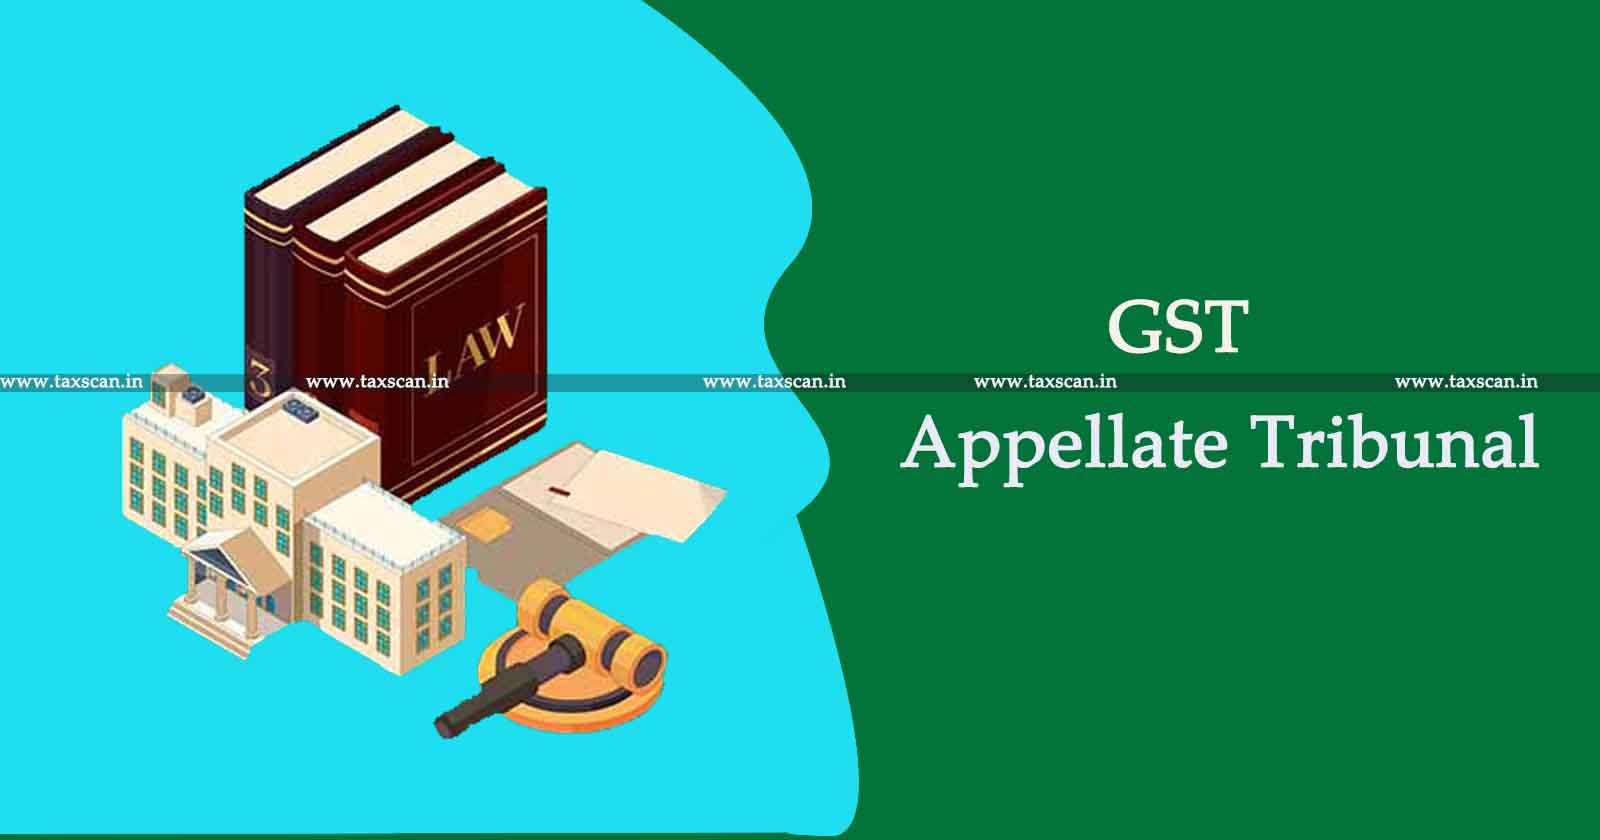 Non-Functioning of GST Appellate Tribunal - Gujarat HC - GST Recovery Proceedings - GST Appellate Tribunal -GST - Gujarat High Court - taxscan